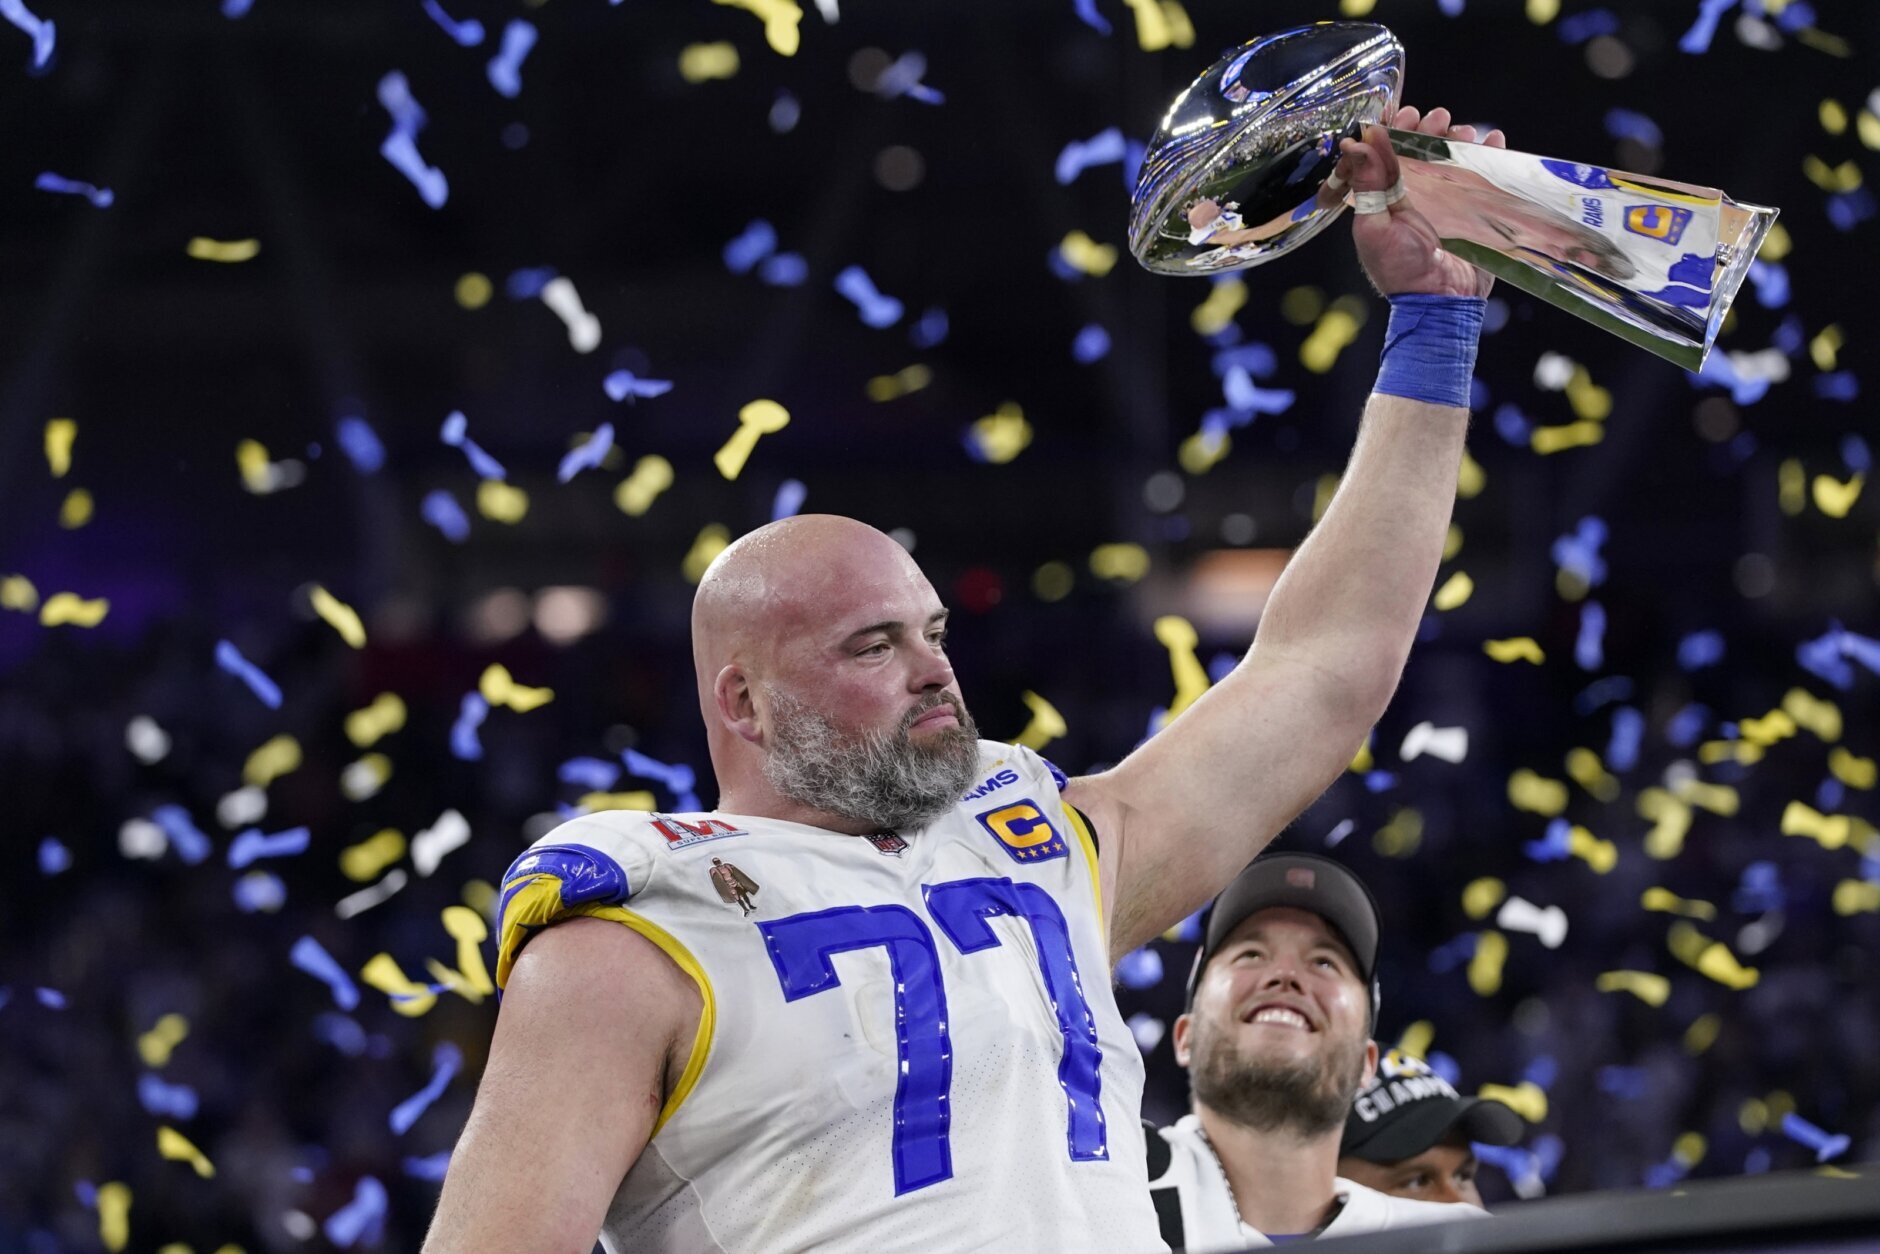 Los Angeles Rams offensive tackle Andrew Whitworth (77) holds up the Lombardi Trophy after the Rams defeated the Cincinnati Bengals in the NFL Super Bowl 56 football game Sunday, Feb. 13, 2022, in Inglewood, Calif. (AP Photo/Mark J. Terrill)